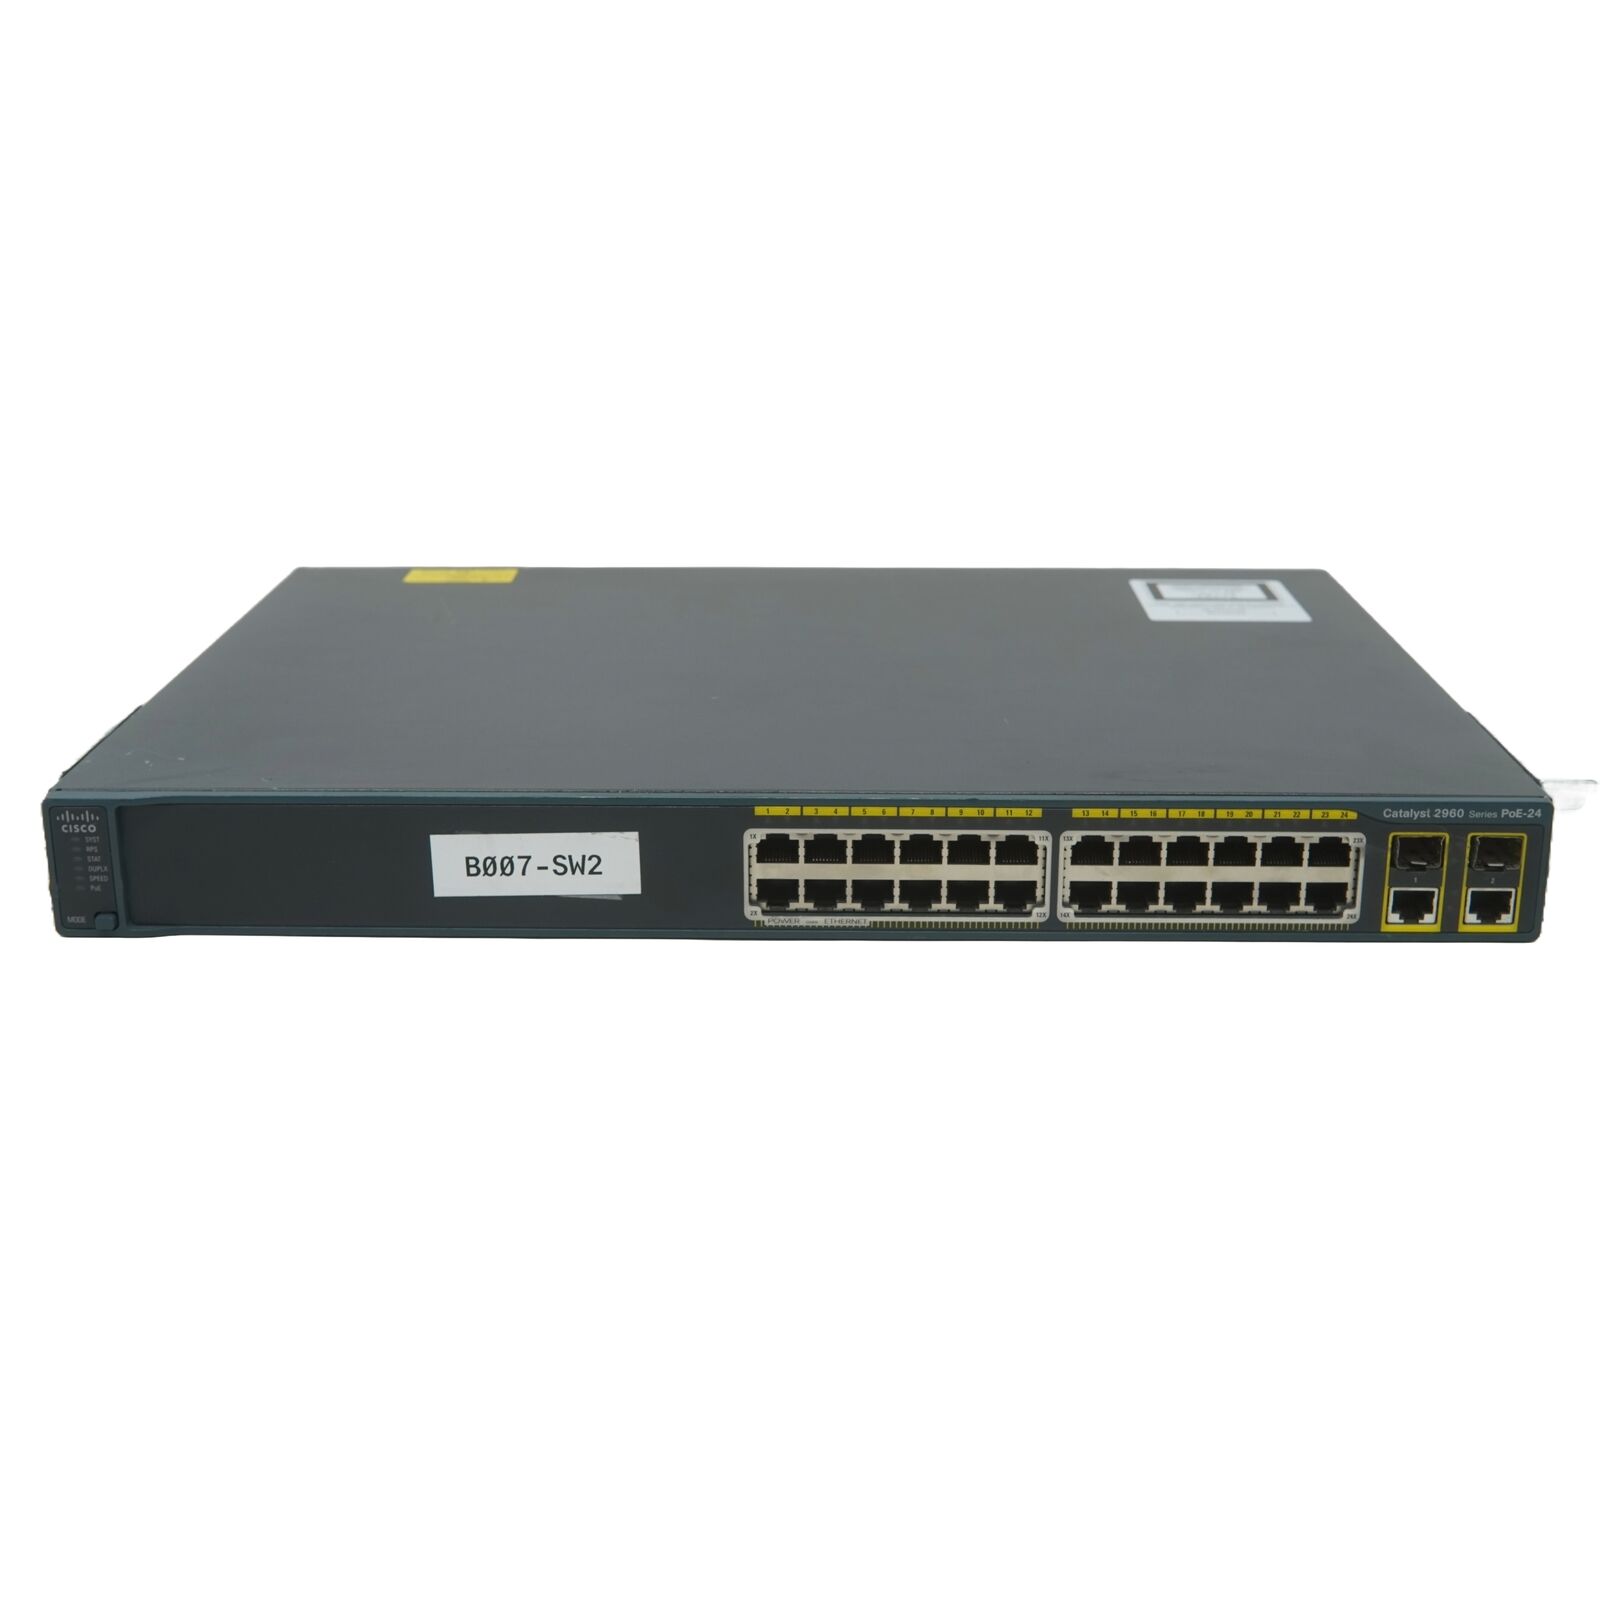 Cisco Catalyst 2960 Series 24-Port Managed Fast Ethernet Switch WS-C2960-24PC-L